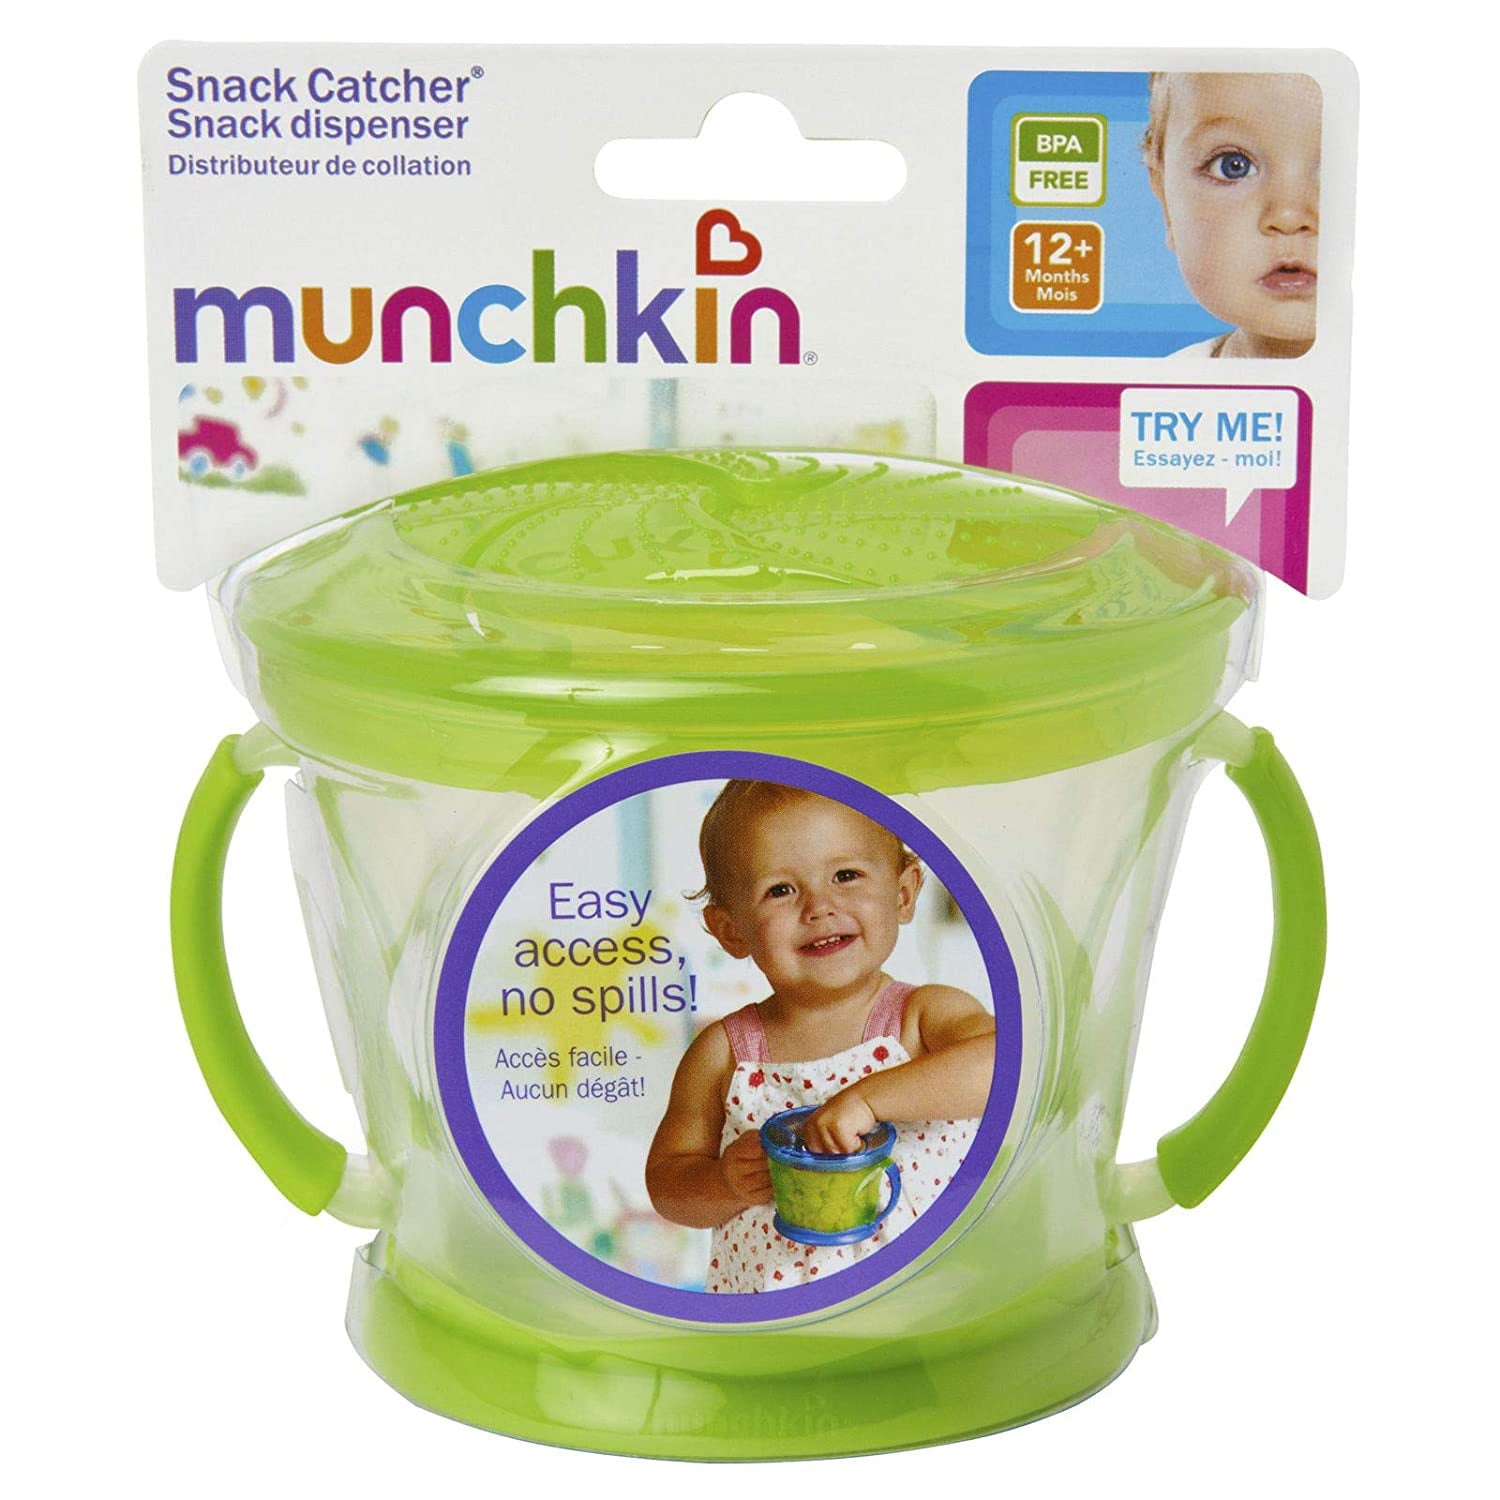 Munchkin Snack Catcher, 9 Ounce, 12+ Months, color may vary